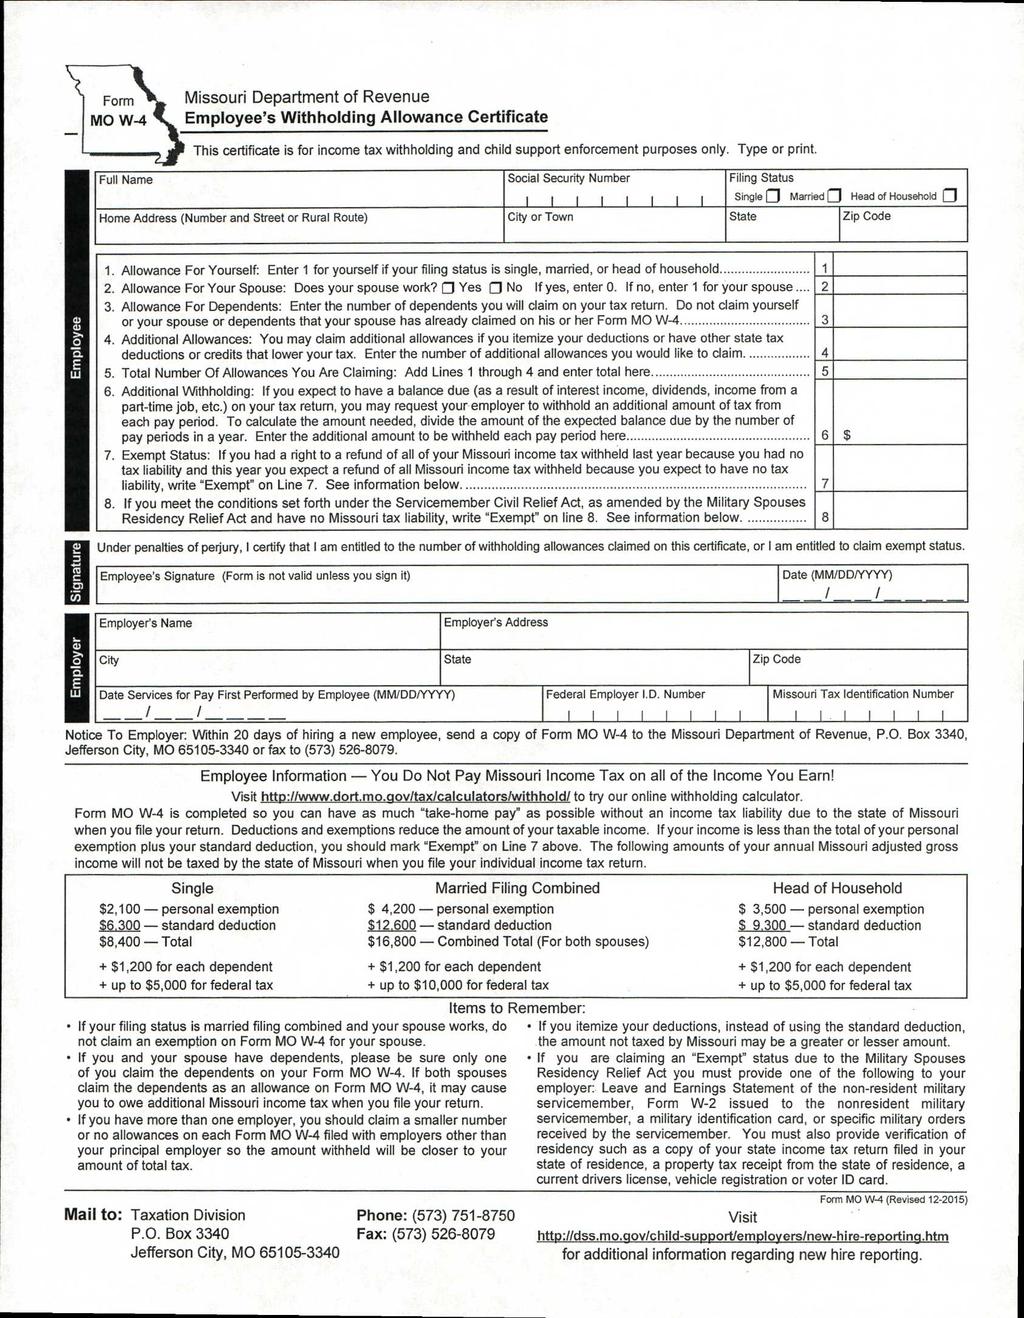 Full Name Missouri Department of Revenue Employee's Withholding Allowance Certificate This certificate is for income tax withholding and child support enforcement purposes only. Type or print.